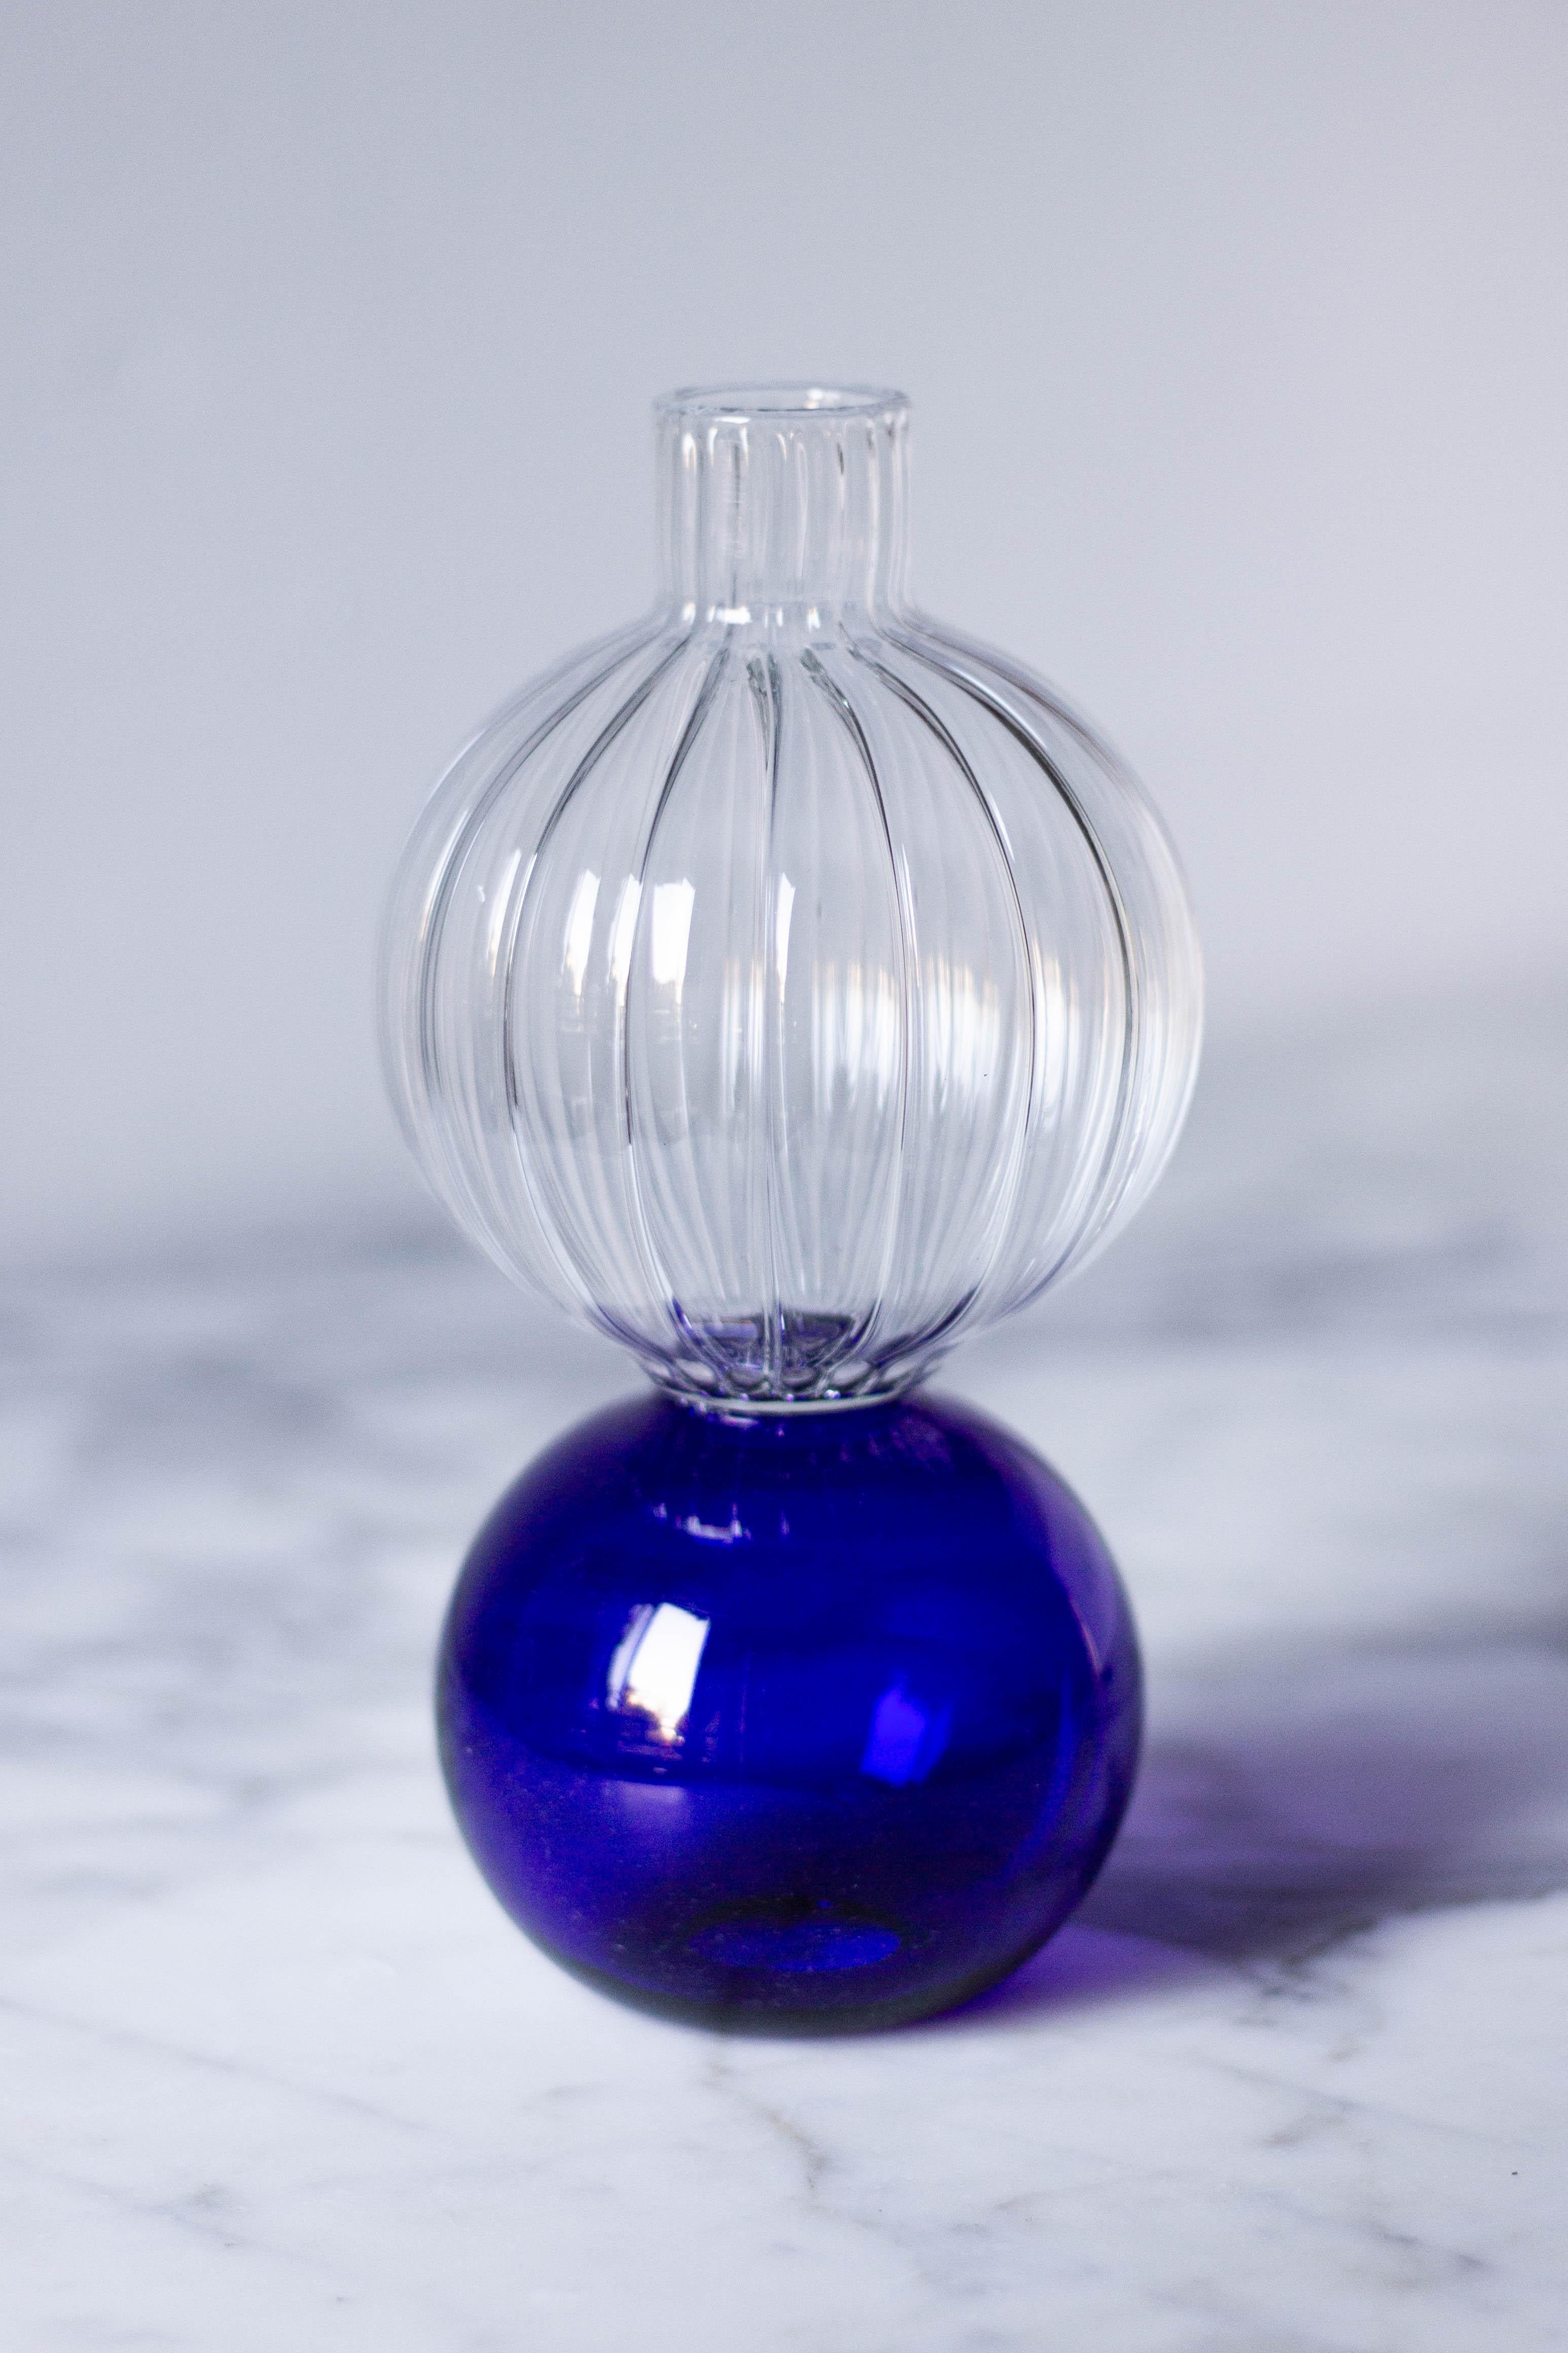 An exquisite piece from the wonder crystal collection, this handcrafted water container is a stunning fusion of clear and blue hues. Artfully blown from crystal, it features a spherical base that gracefully transitions into a bud-shaped top adorned